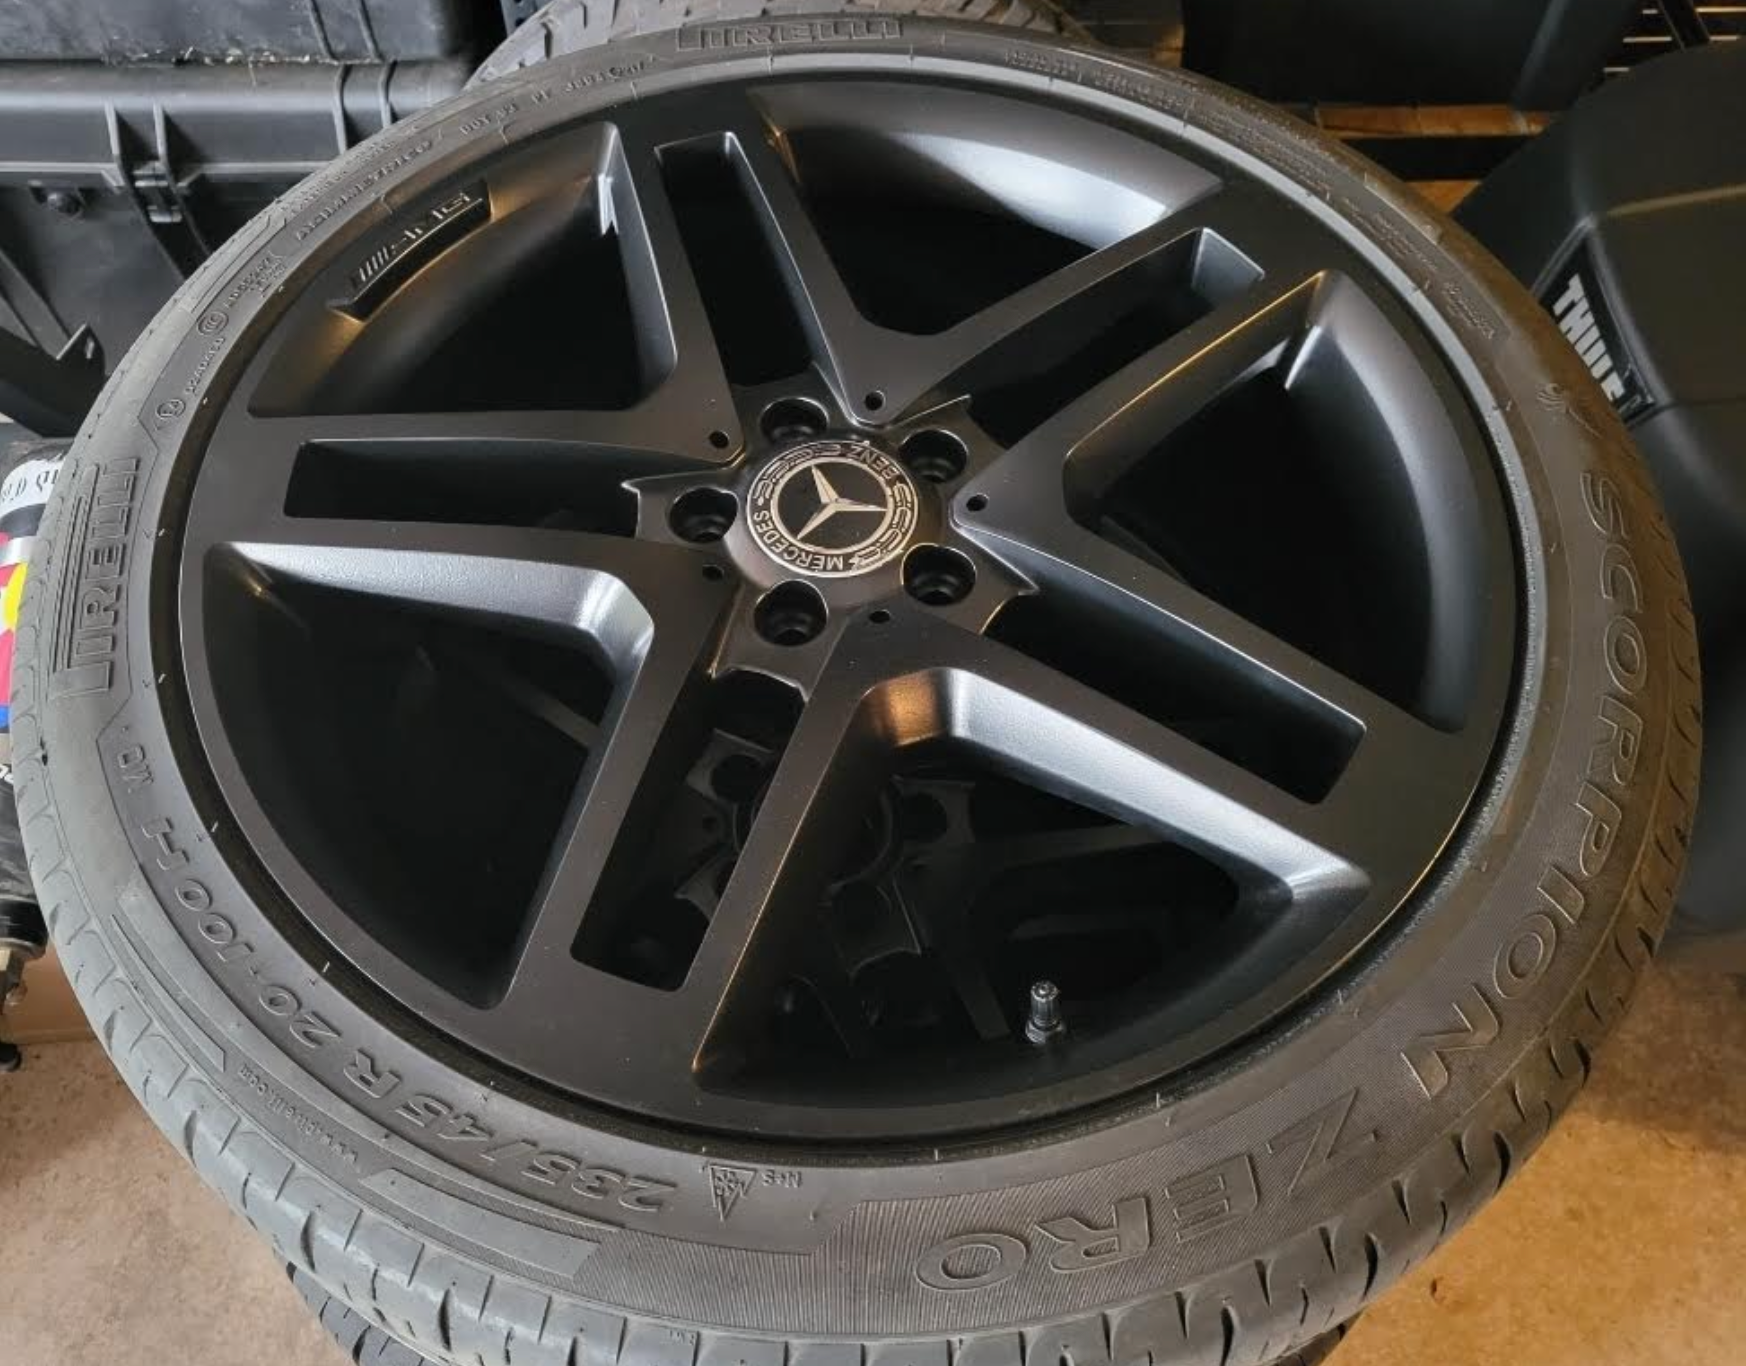 Wheels and Tires/Axles - AMG Wheels And Tires - Refreshed - Used - 0  All Models - Colorado Springs, CO 80904, United States